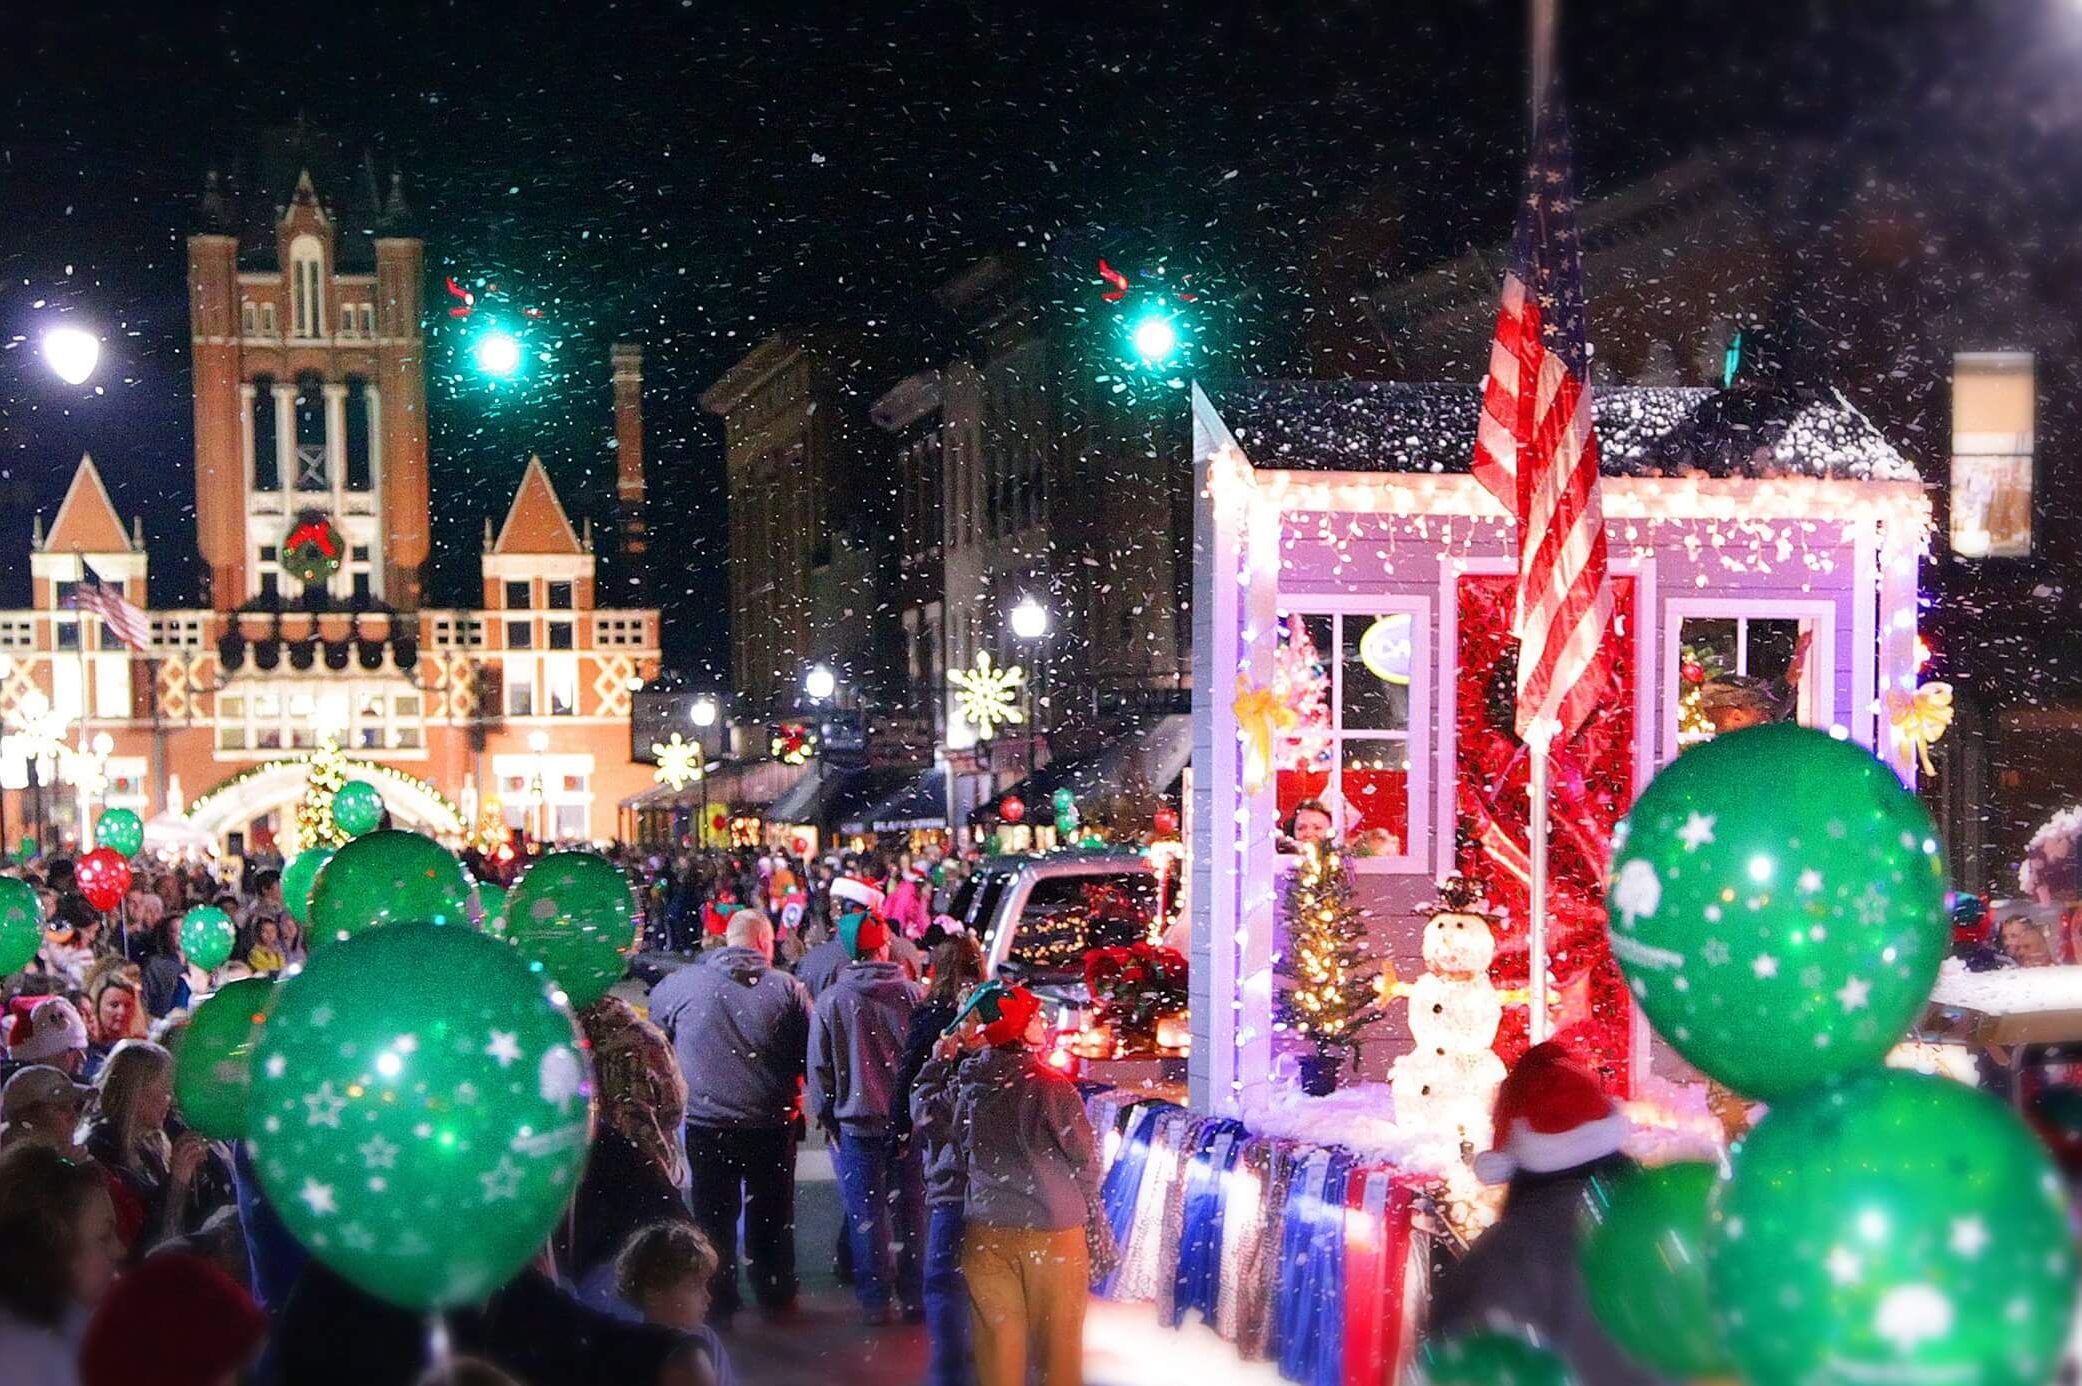 <p class=""><strong>Best for:</strong> Bourbon lovers</p> <p>Nicknamed "the most beautiful small town in America," this old stagecoach stop gets into the holiday spirit with Southern style and hospitality, making it one of the best Christmas towns in the country. Light Up Bardstown starts the season with the illumination of Main Street and the town Christmas tree, along with "Christmas Corner," which has hot cocoa, cookies, balloons, and face painting for kids. Throughout December, visit My Old Kentucky Home, an 1818 mansion said to have inspired the classic song, to see it decked for the holidays. Costumed performers sing the song as you view decorated rooms from colonial times to the Victorian era to the 1920s; they also act out "An Old Kentucky Christmas Carol," based on Dickens' classic tale. In addition, the town hosts a parade, a "North Pole Express" train ride, and a candlelit Christmas Tour of Homes. Seasonal events at the area's bourbon distilleries add grownup celebration to Bardstown's many holiday happenings.</p> <p>Step back in time with a stay at the Jailer's Inn Bed and Breakfast, a circa 1819 jail-turned-hotel centrally located in downtown Bardstown. You can also take tours of the old cells—and even stay in one!—although most of the guest rooms are modern and comfortable.</p> <p class="listicle-page__cta-button-shop"><a class="shop-btn" href="https://www.tripadvisor.com/Hotel_Review-g39163-d118238-Reviews-or10-Jailer_s_Inn_Bed_and_Breakfast-Bardstown_Kentucky.html#REVIEWS">Book Now</a></p>